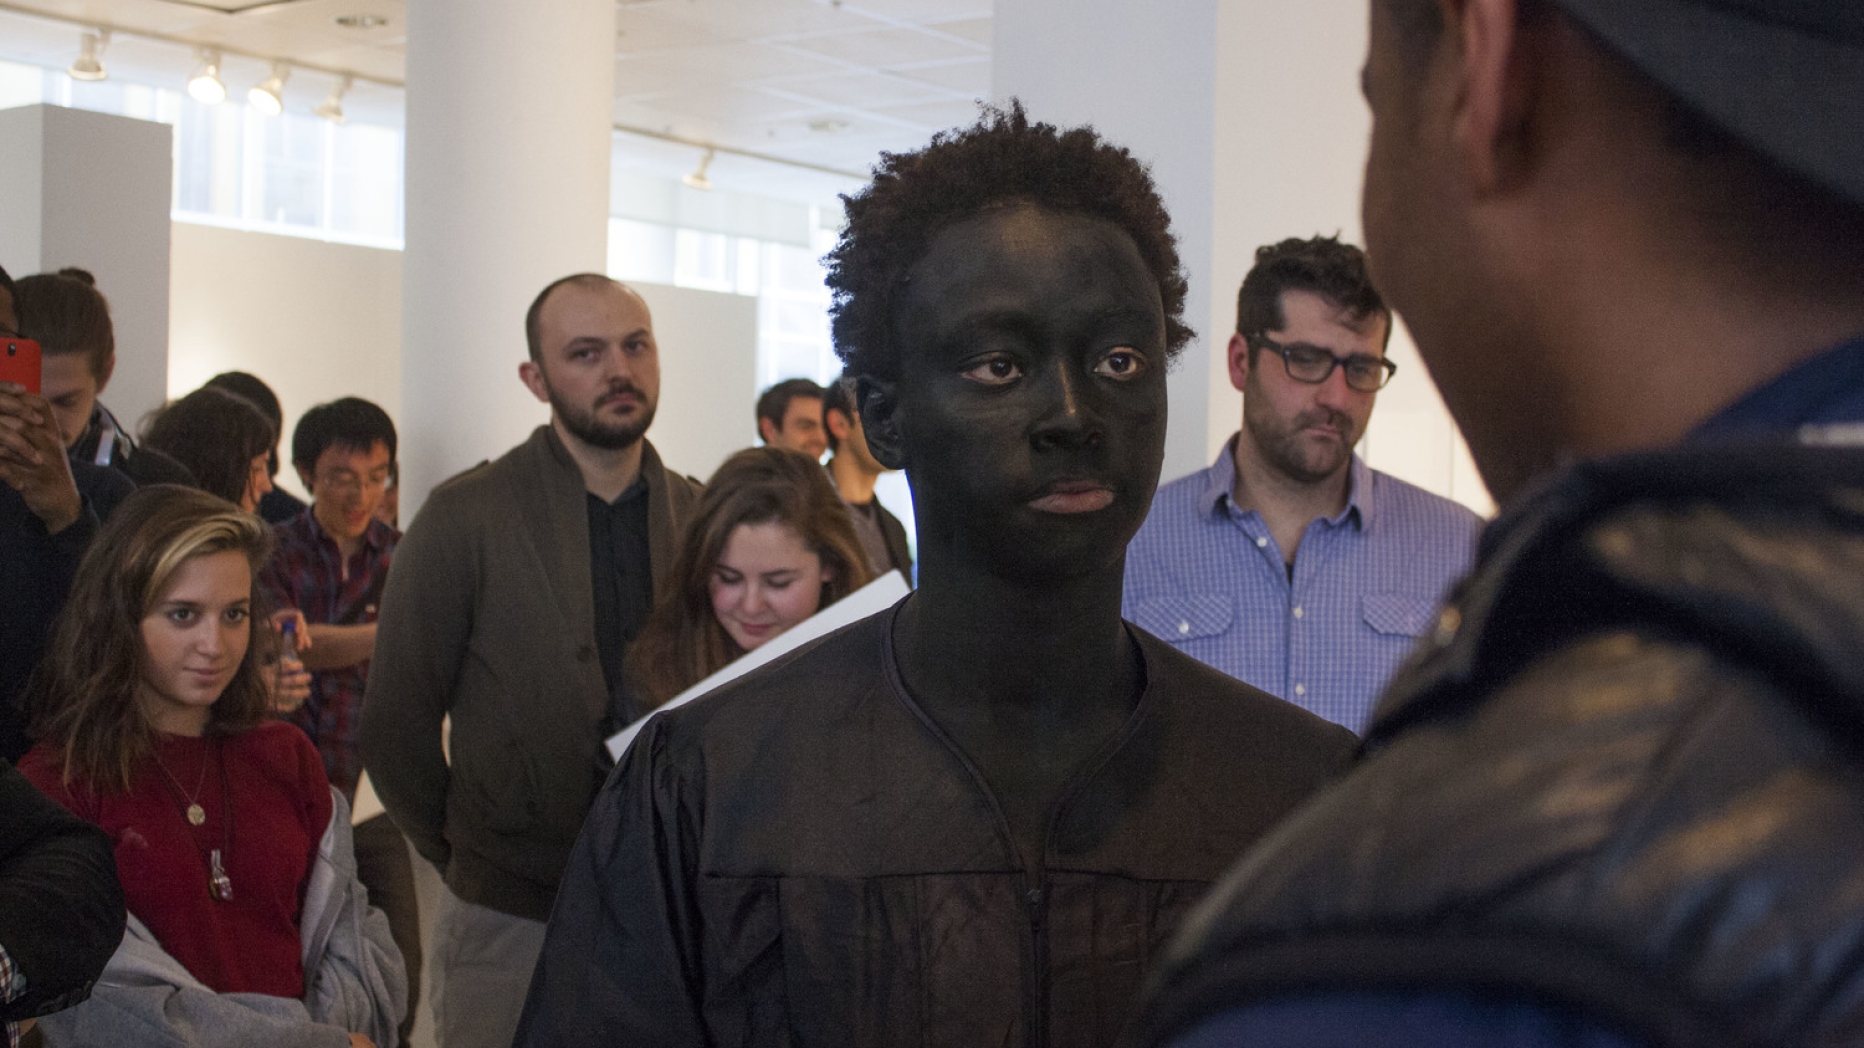 Performance art piece featuring a student in blackface.